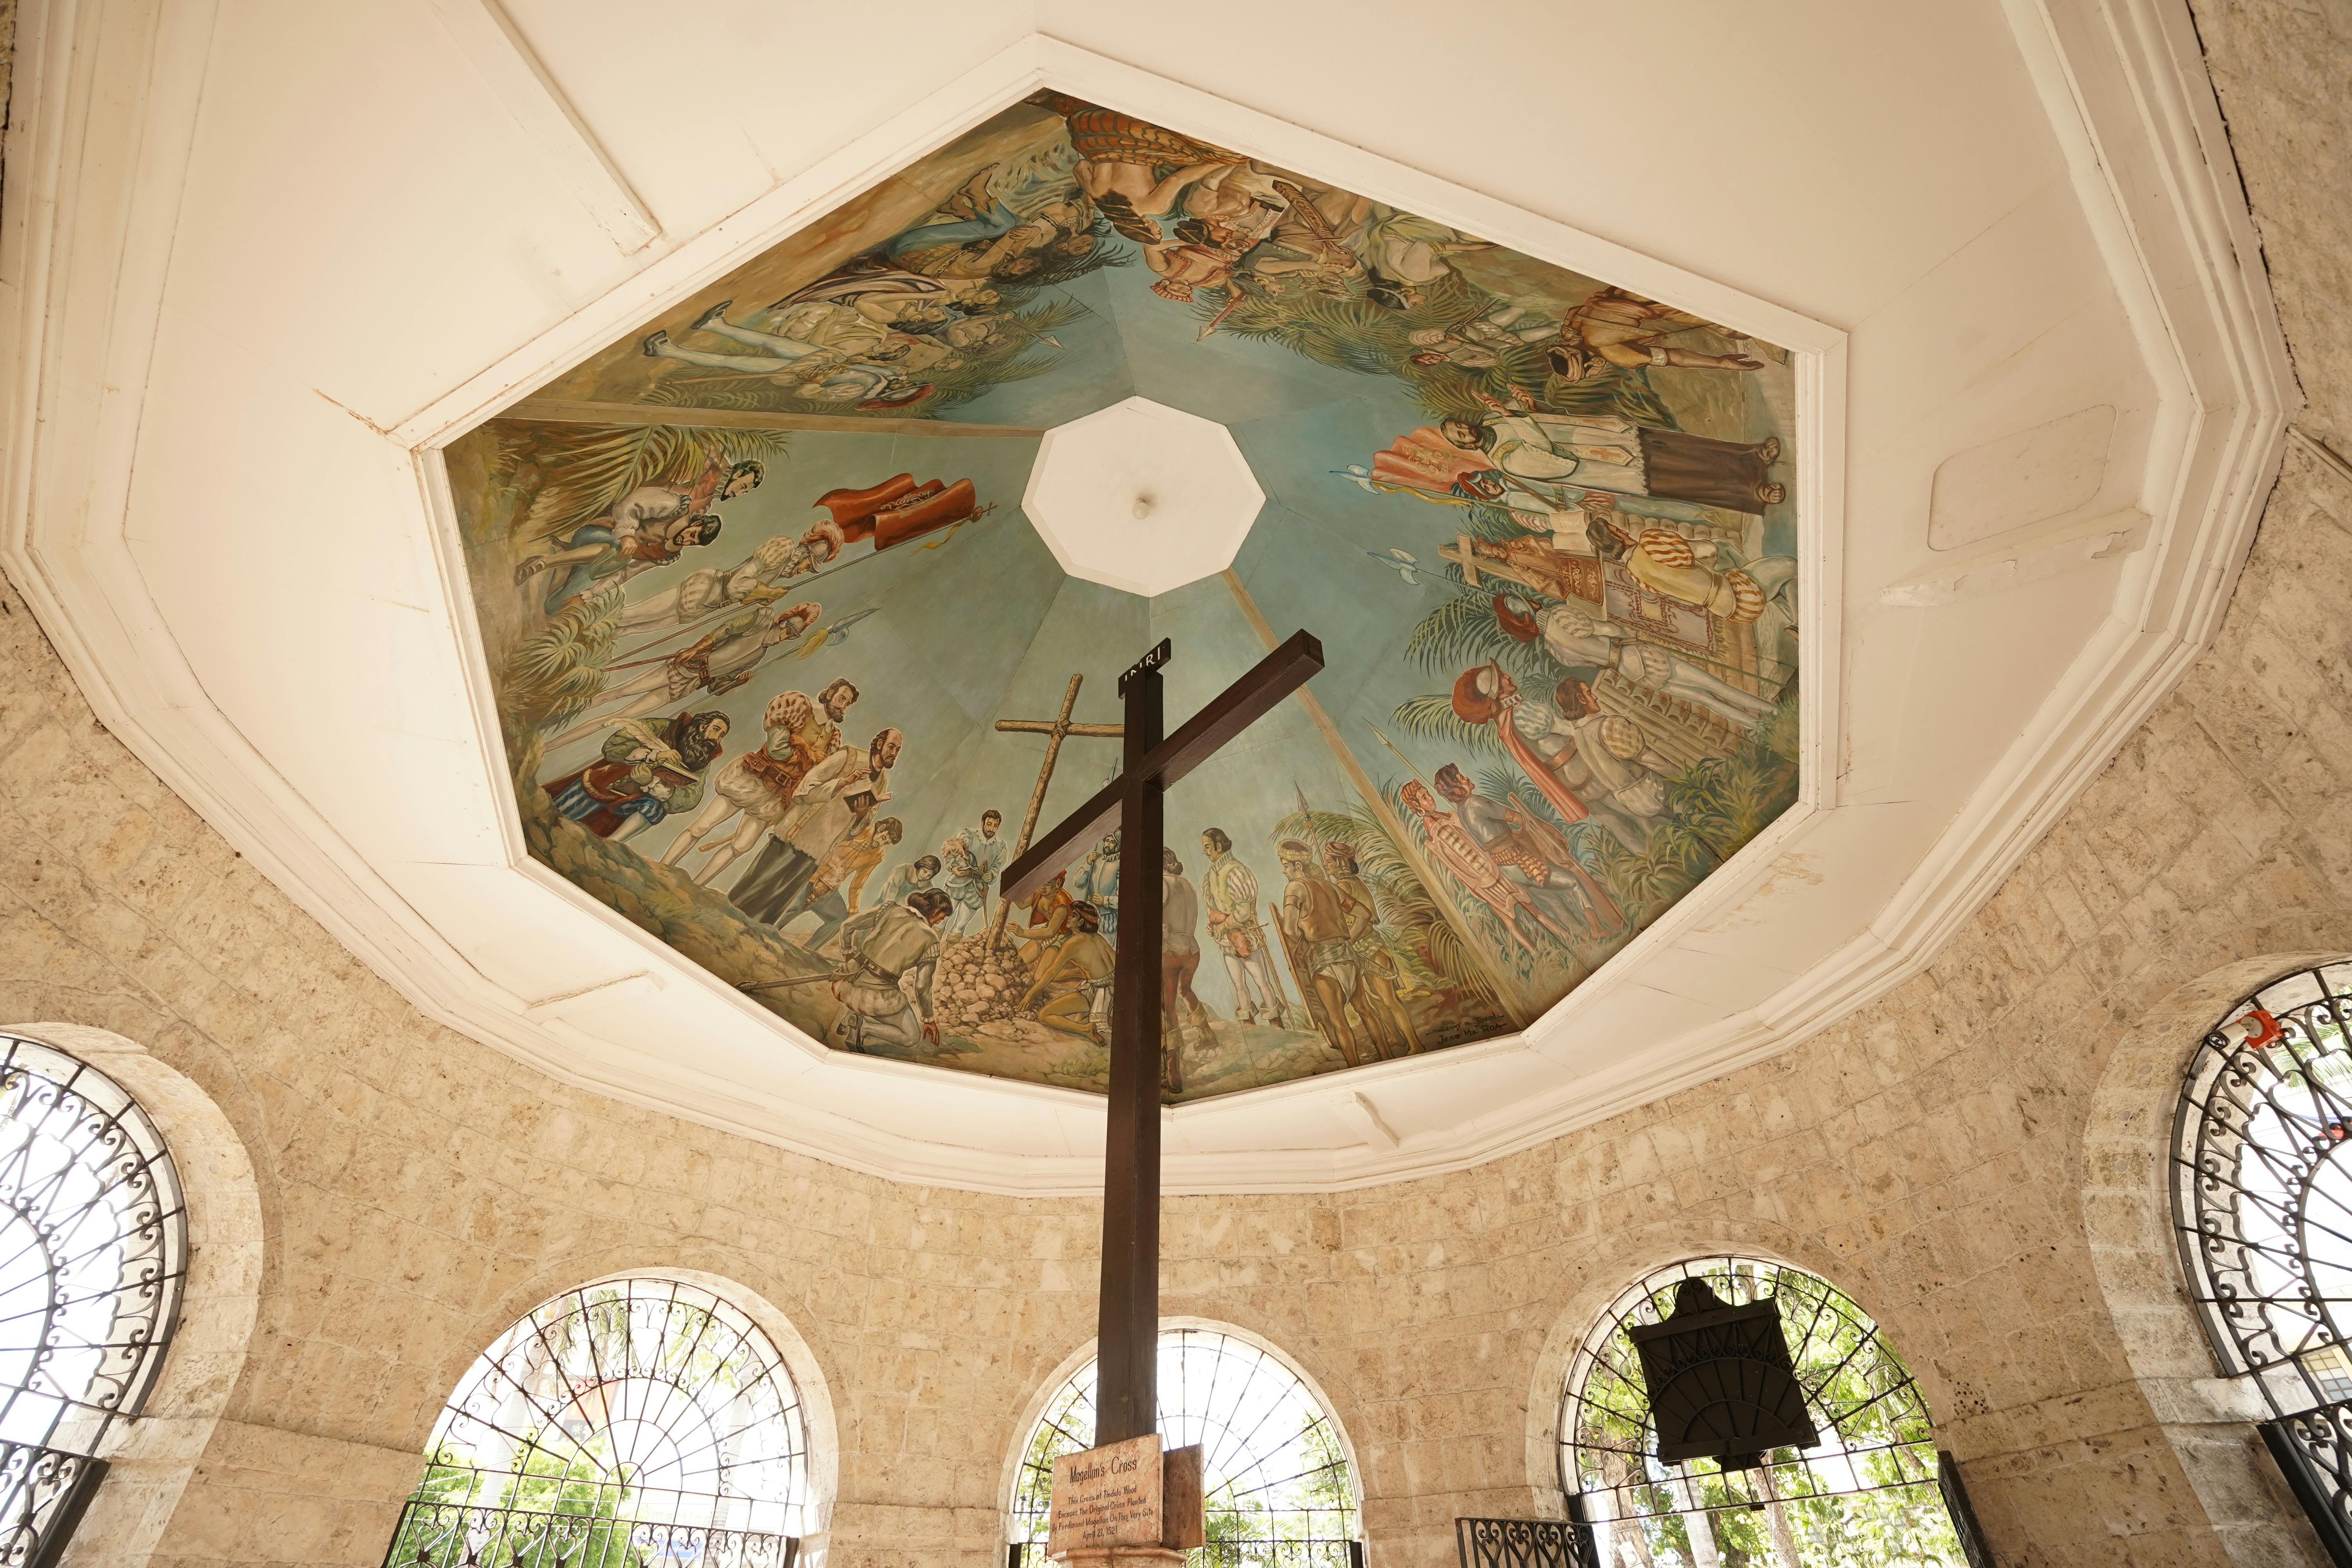 Magellan's Cross is one of the most popular attractions in the Philippines which can be found in Cebu